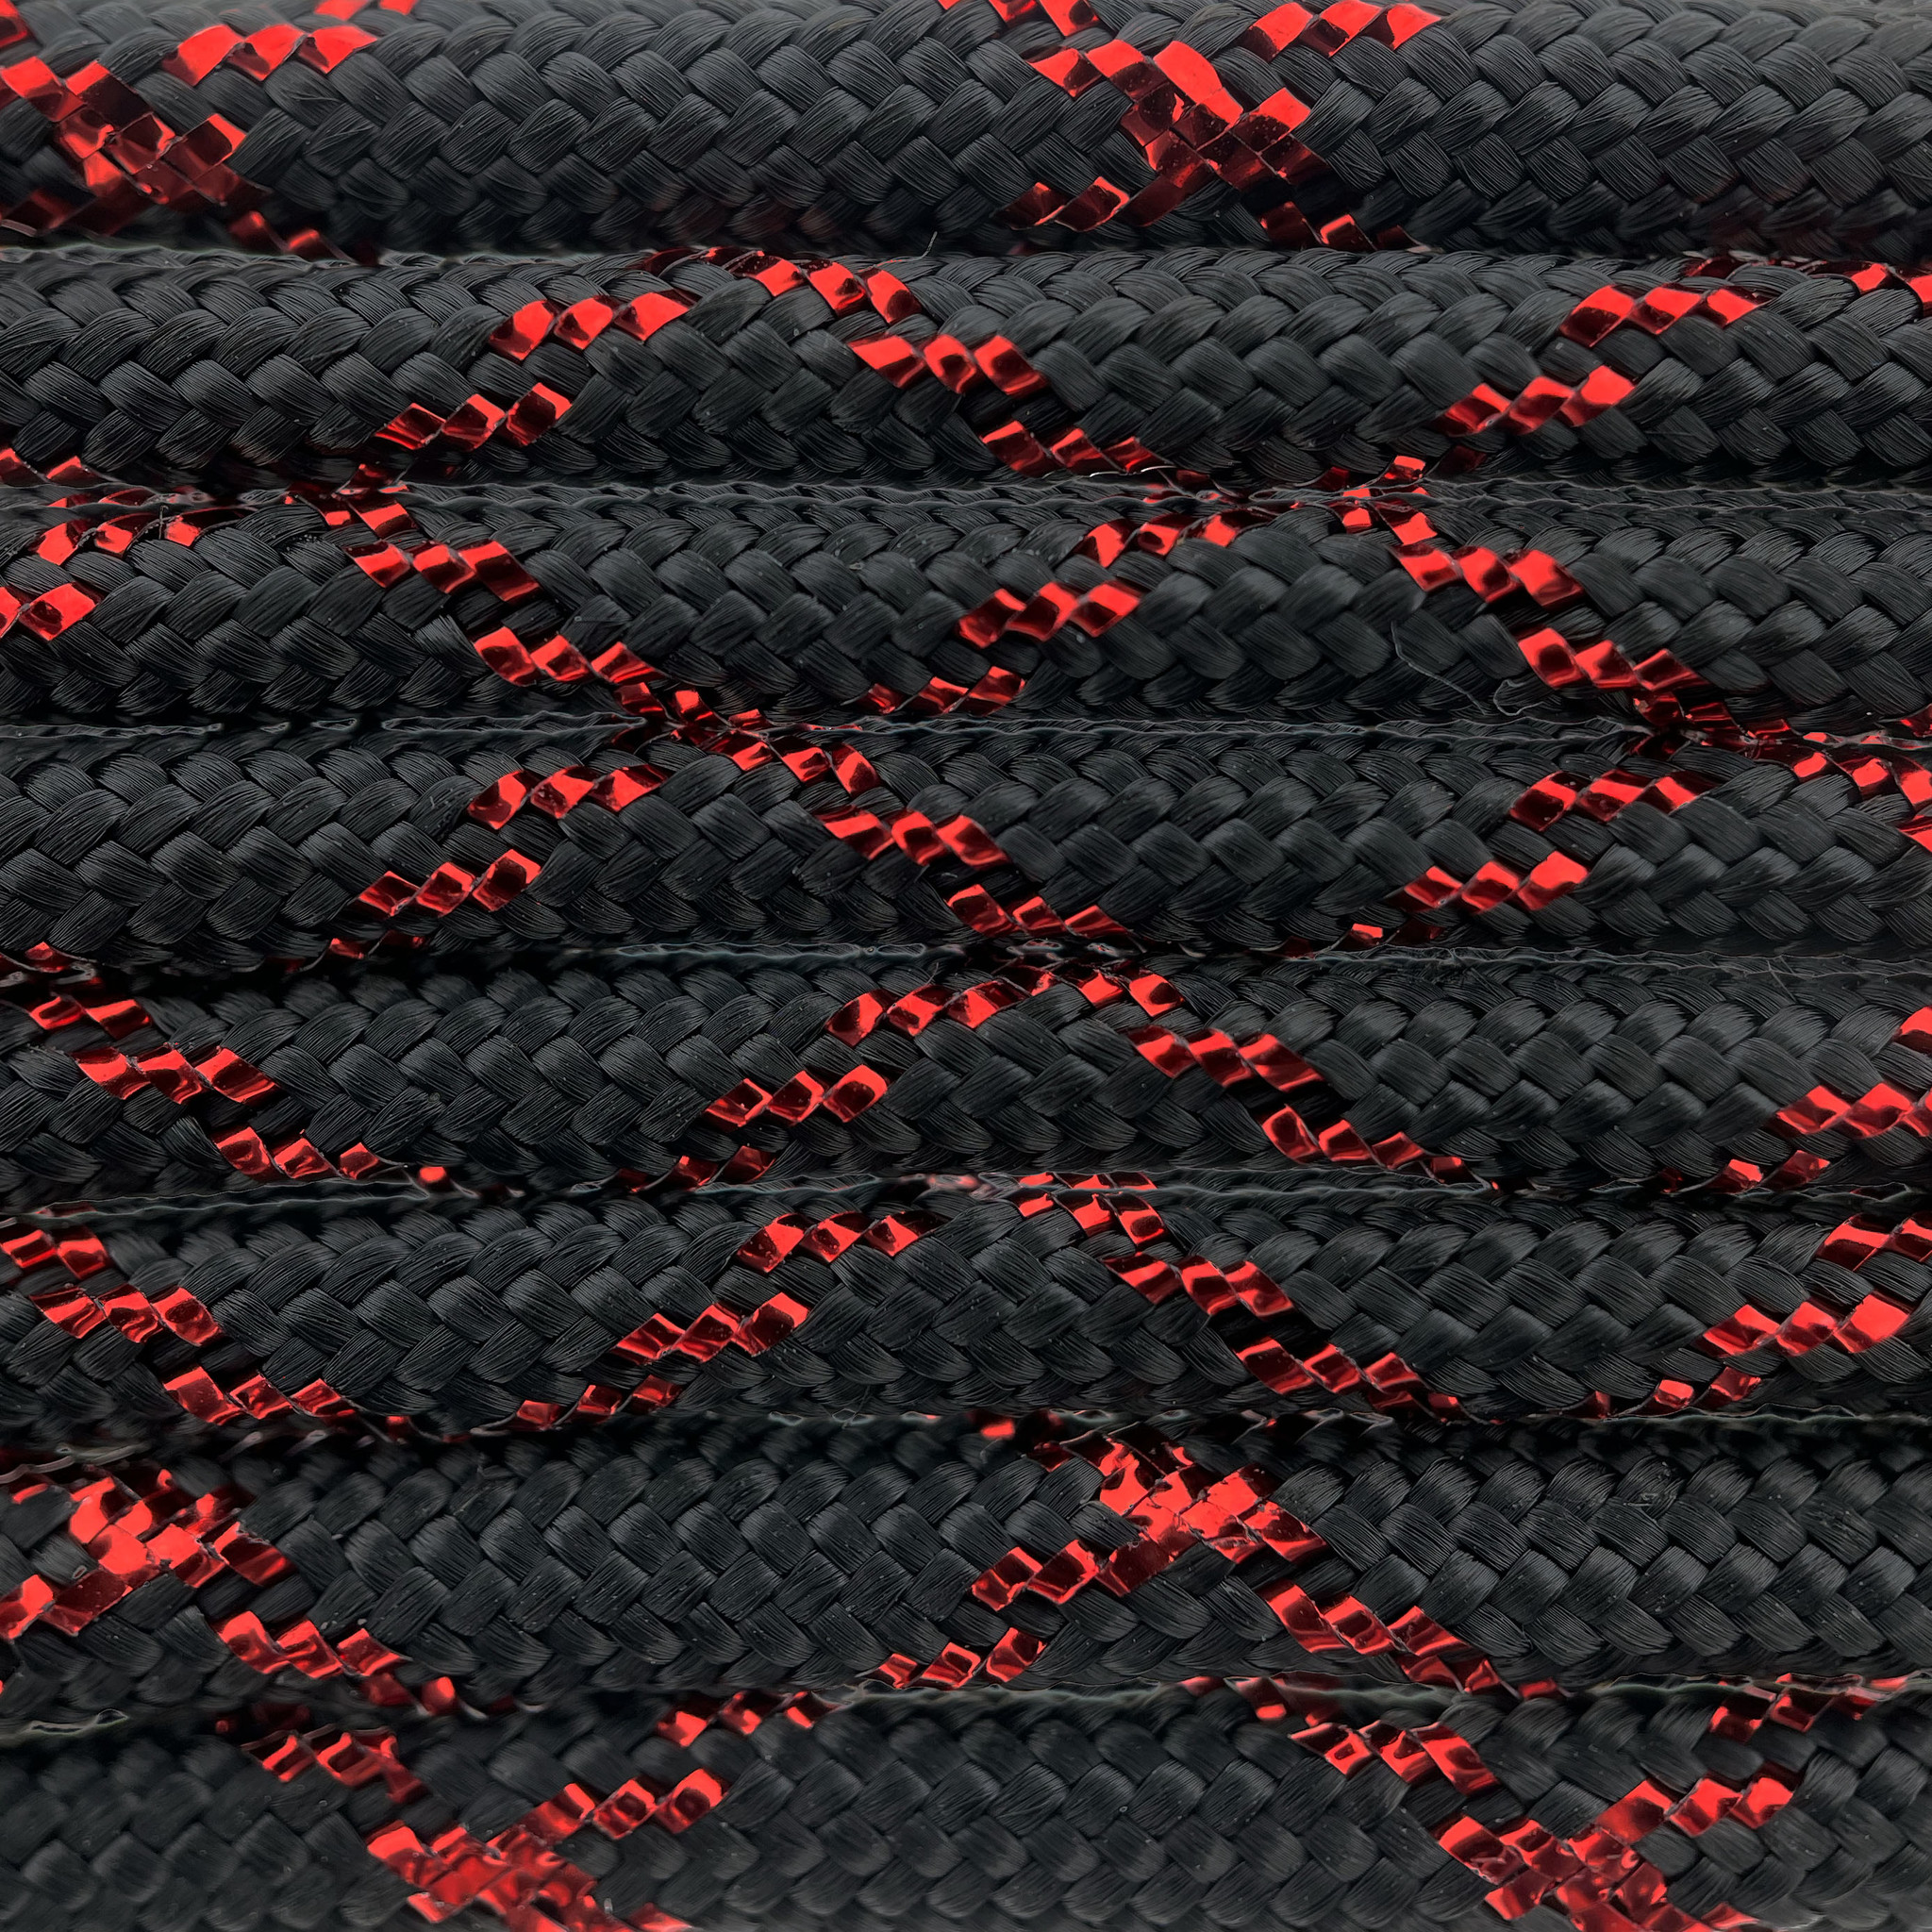 Buy Paracord 550 type III Black / Imperial Red X from the expert -  123Paracord